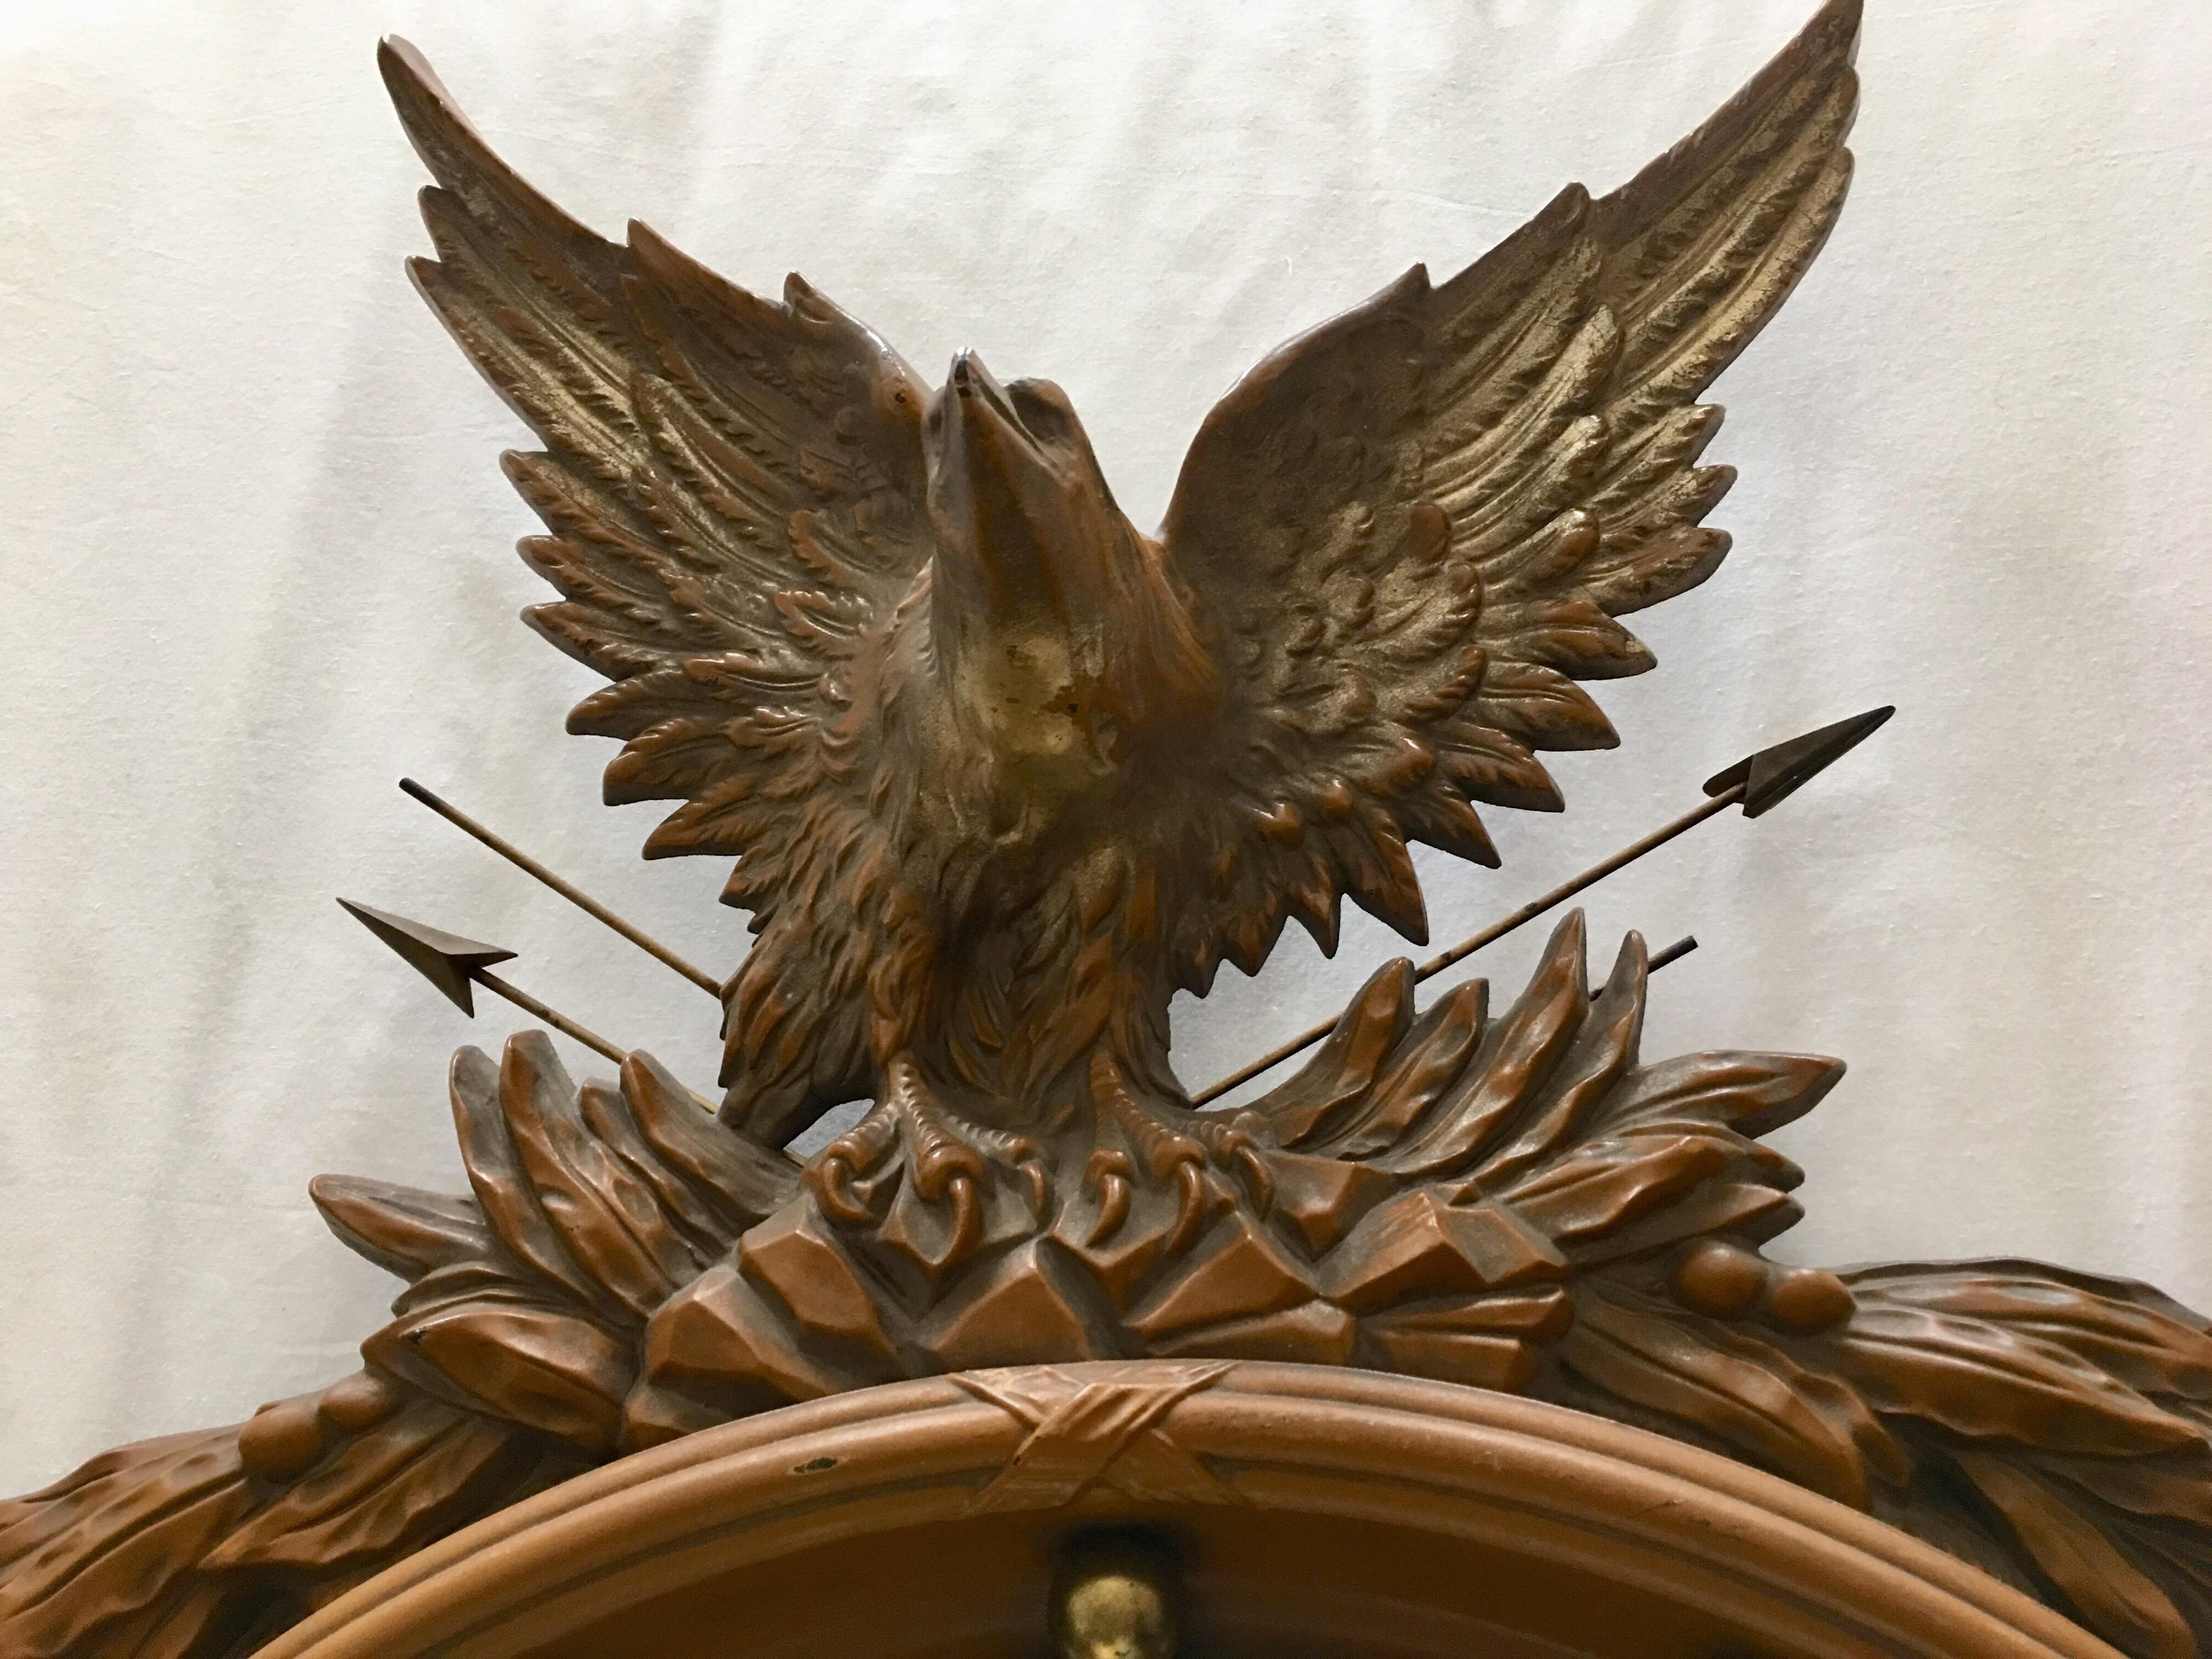 Large Mid-Century Modern sculptural Regency style convex fish eye eagle wall art mirror. The detailed carved faux wood look frame features thirteen gilded balls and a traditional crest with metal arrows and acanthus foliate garland decoration.